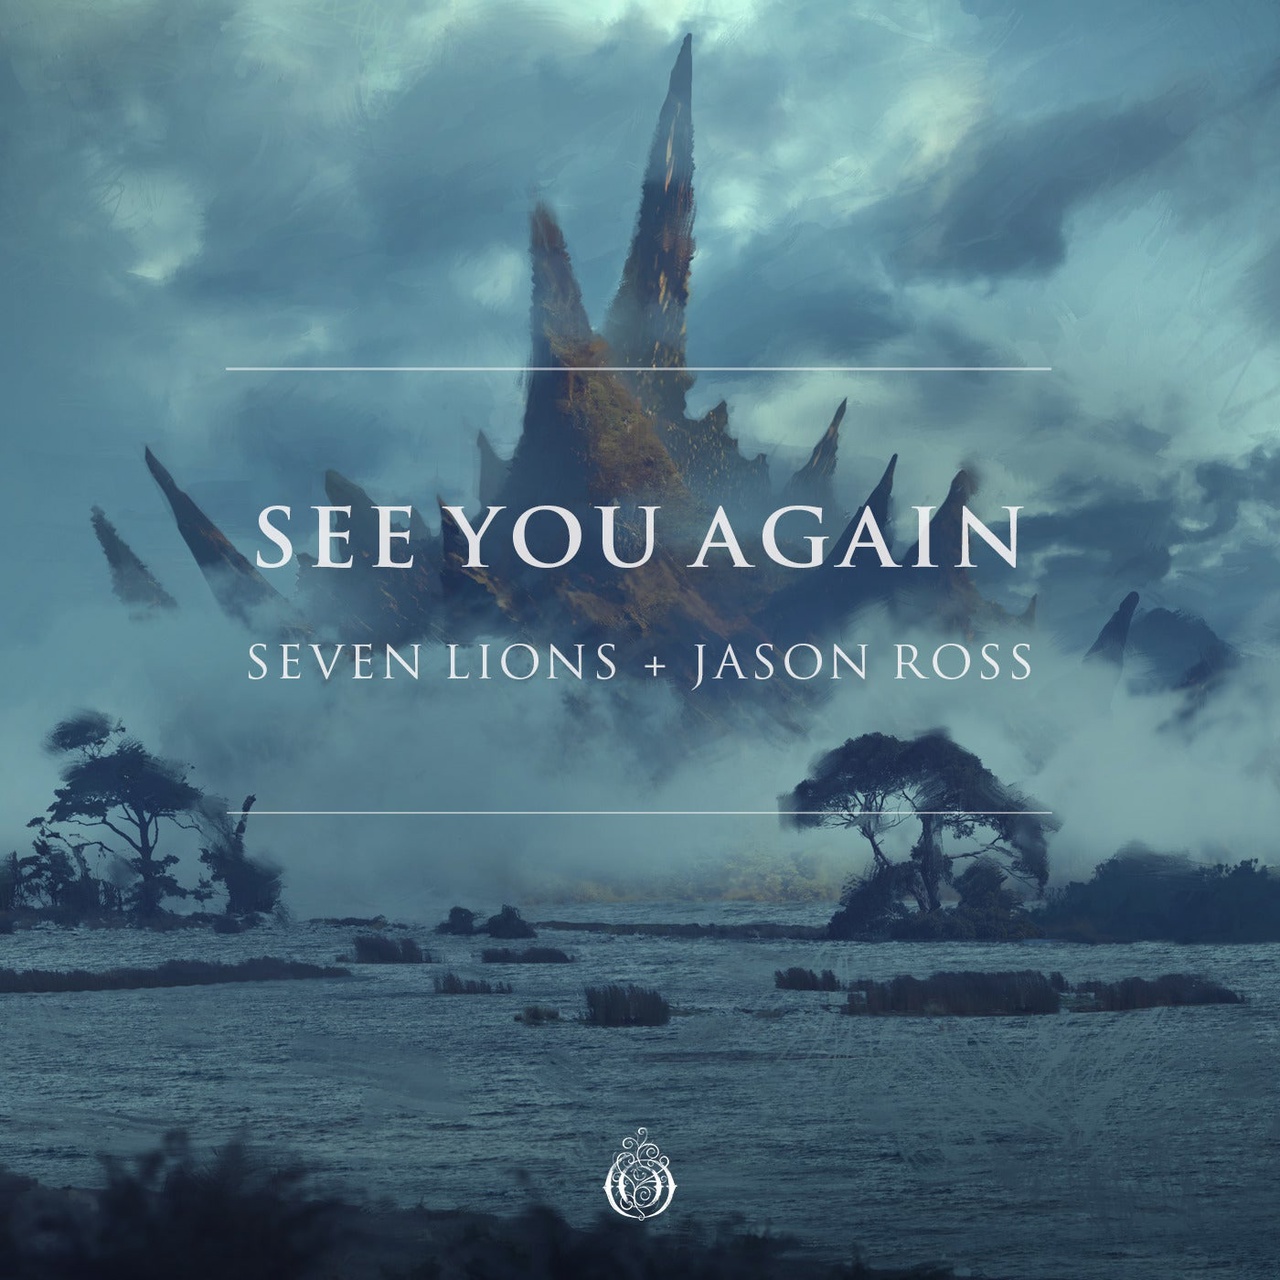 Seven Lions, Jason Ross, & Fiora — See You Again cover artwork